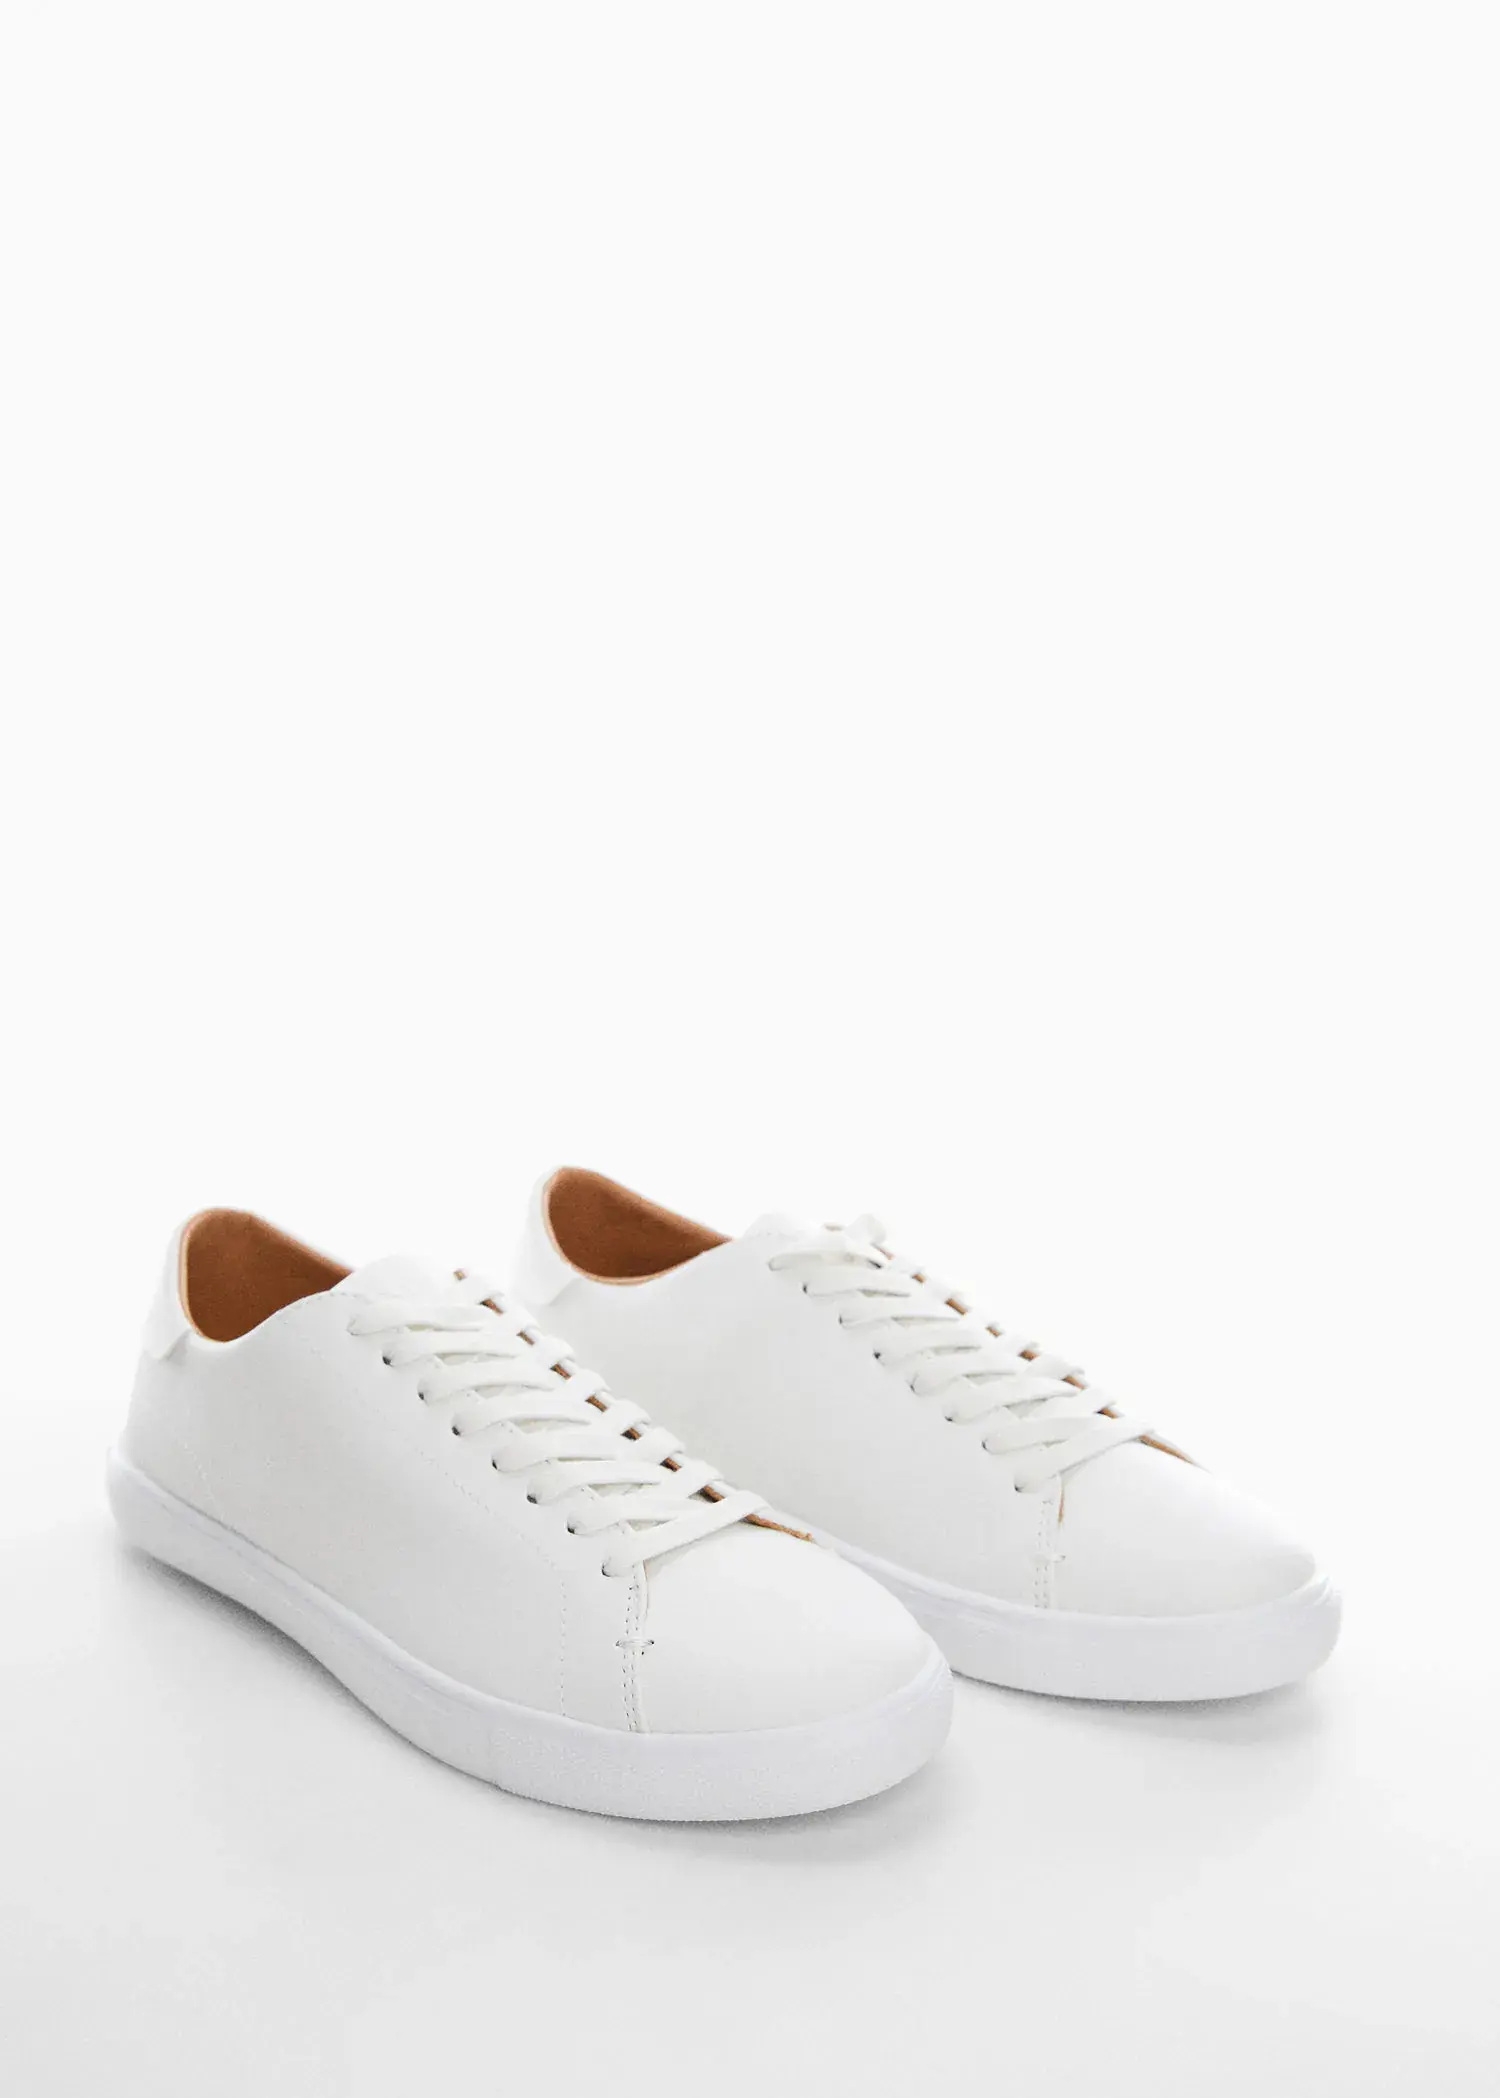 Mango Noncolored leather sneakers. a pair of white sneakers on a white surface. 